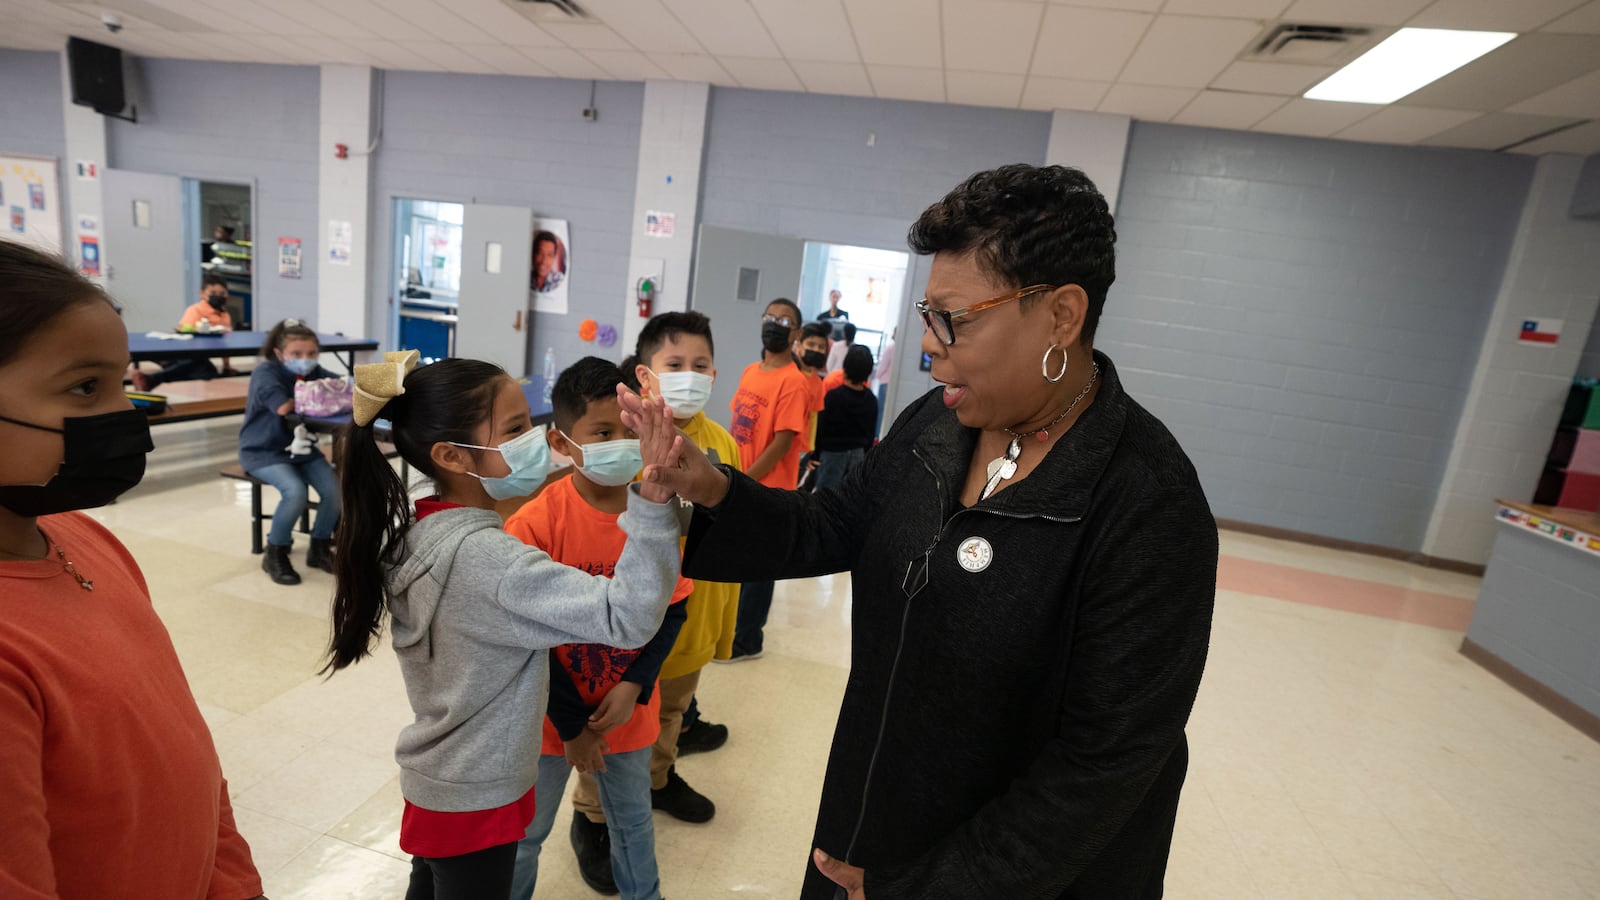 A woman wearing glasses gives high fives to a line of students in a school cafeteria